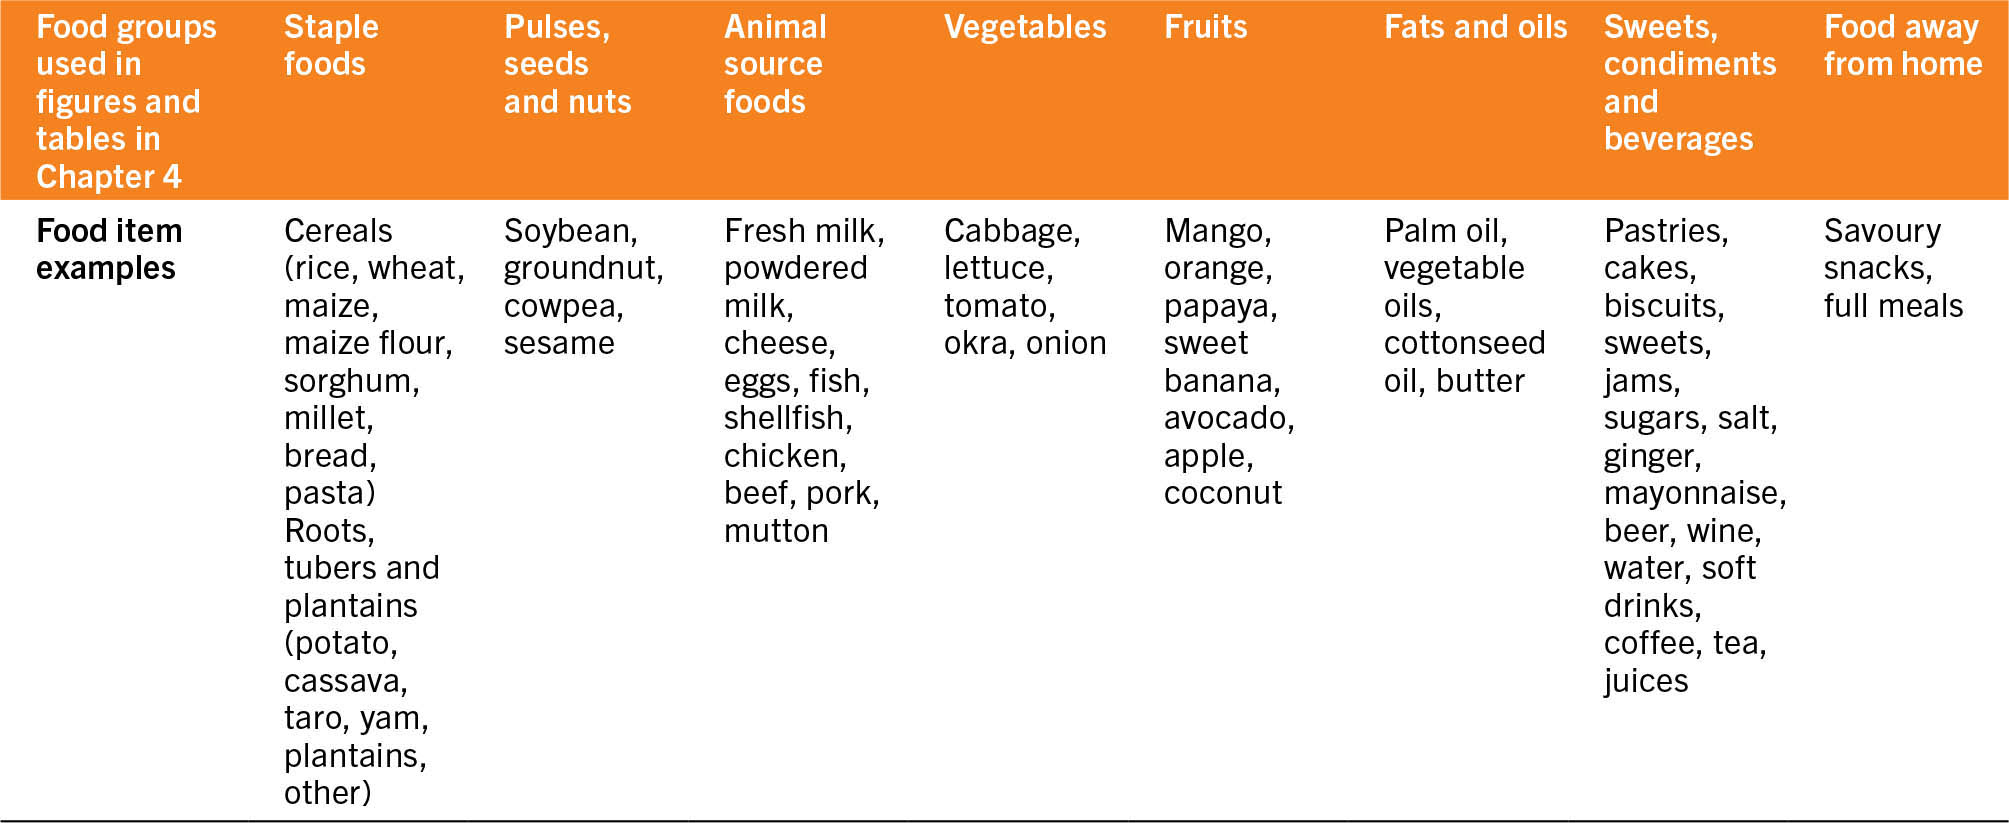 A table lists the summary of food group aggregates and terminology of food groups.